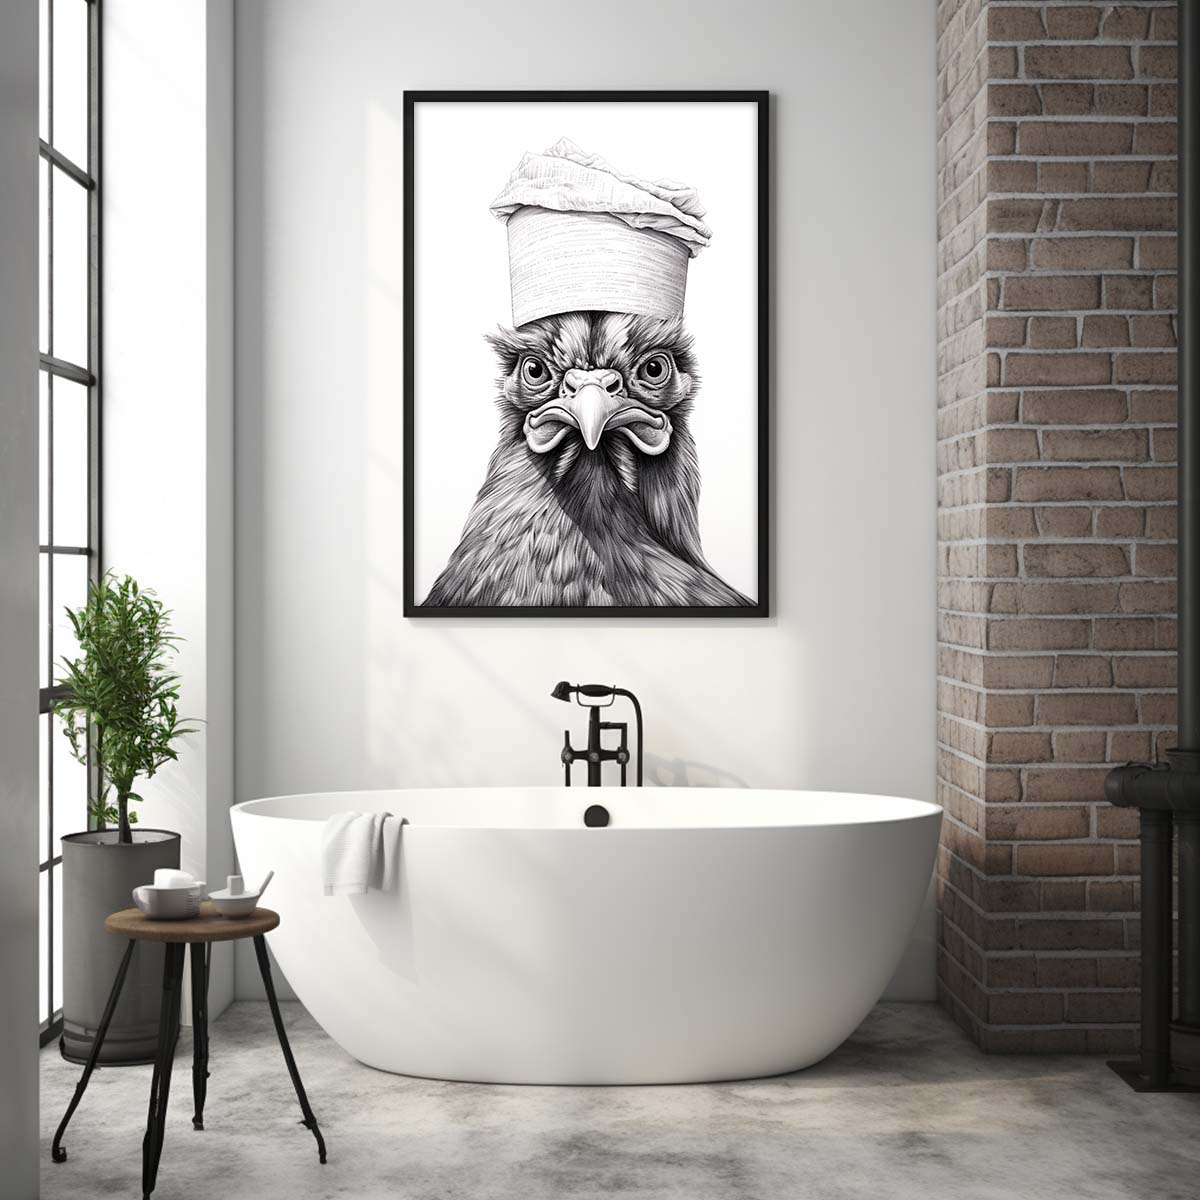 Cute Chicken With Toilet Paper, Canvas Or Poster, Funny Chicken Art, Bathroom Wall Decor, Home Decor, Bathroom Wall Art, Chicken Wall Decor, Animal Decor, Animal Gift, Animal Illustration, Digital Download